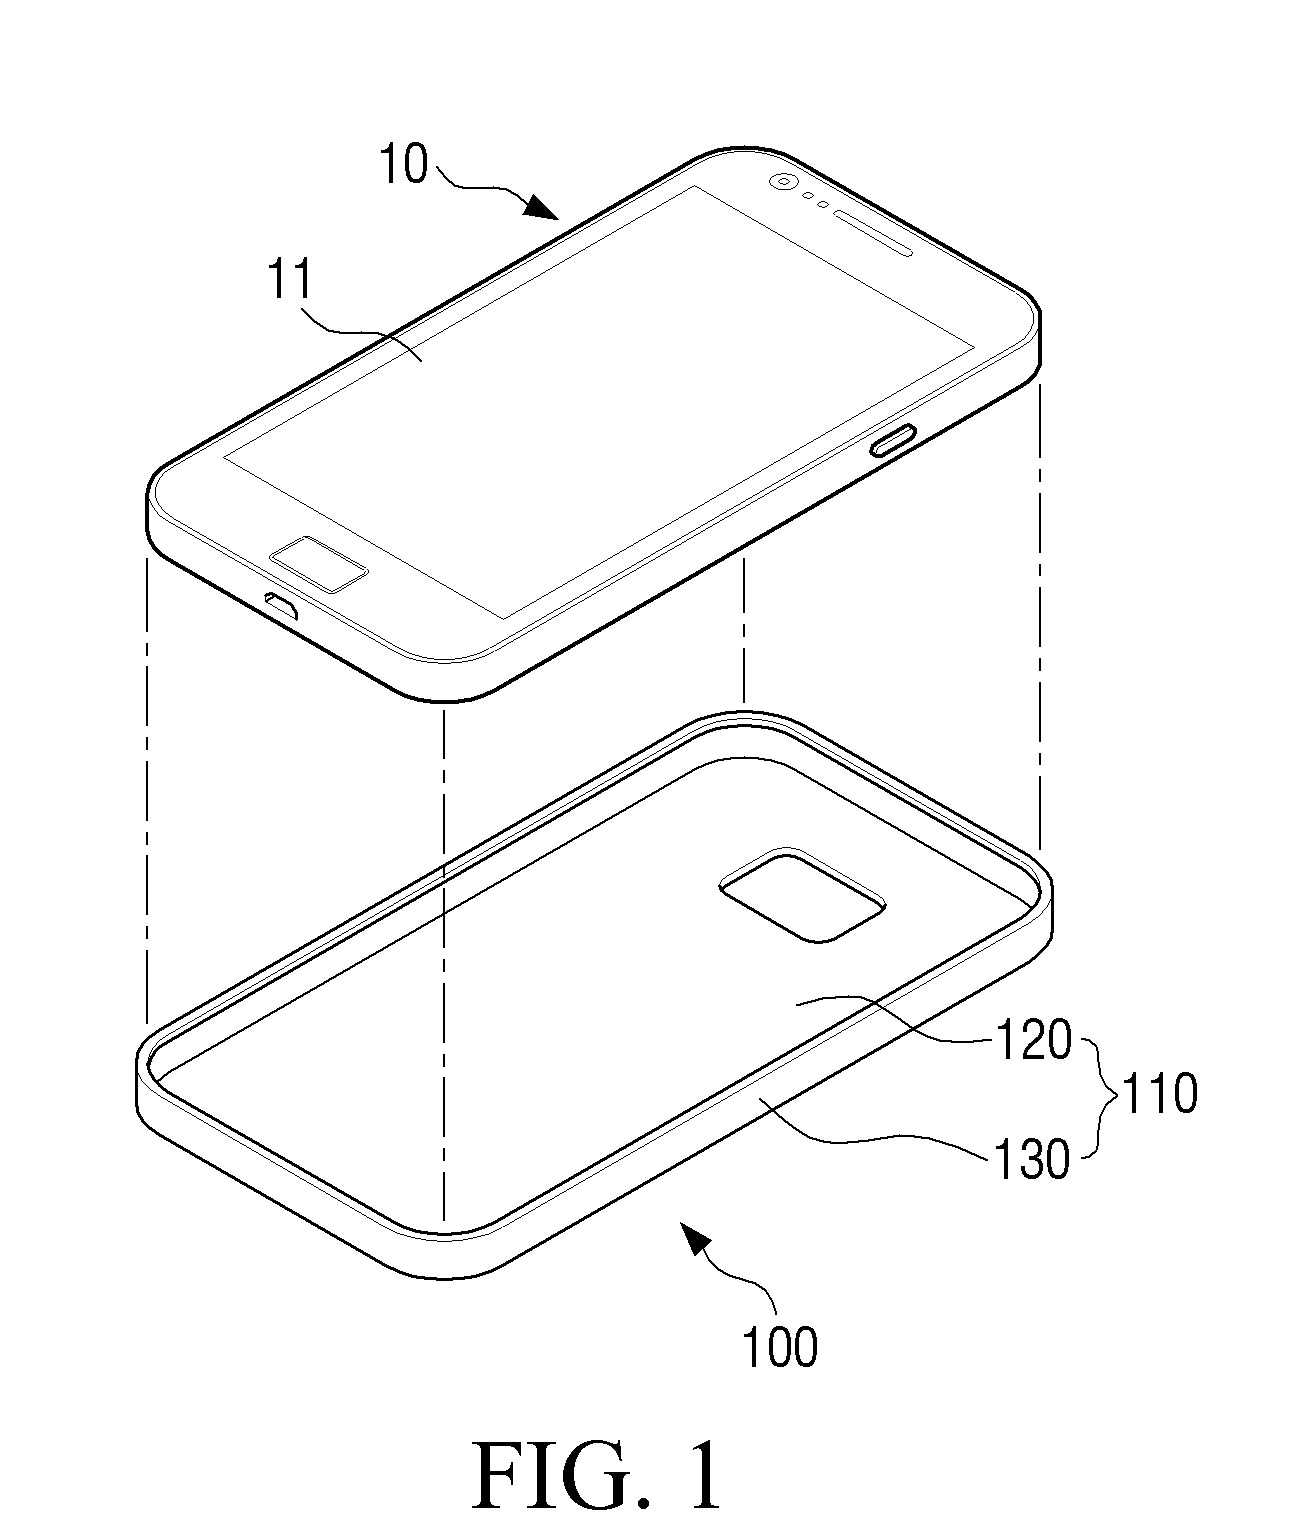 Protective case for mobile device